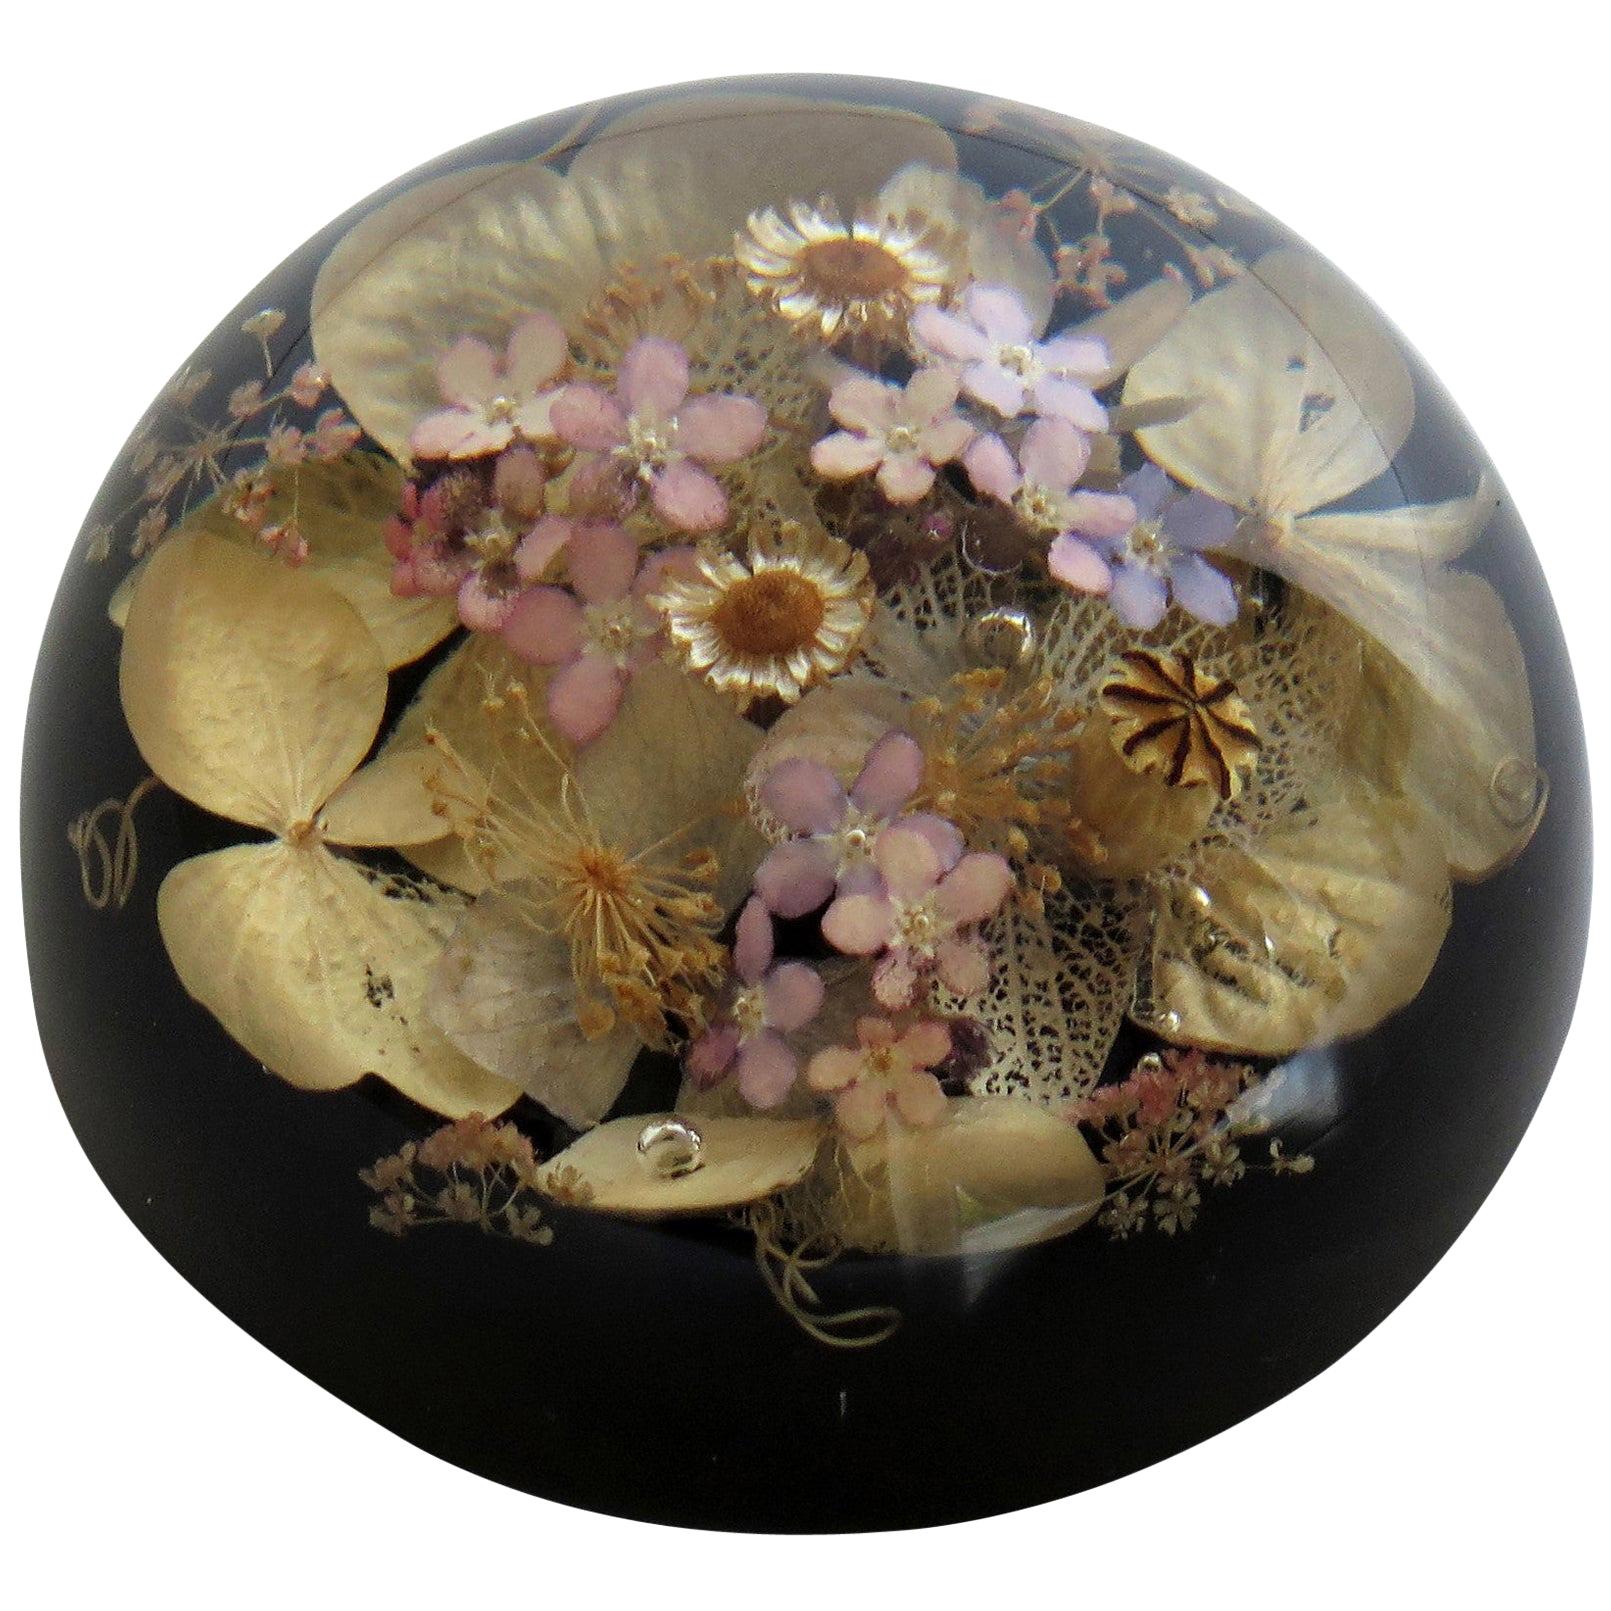 Handmade Paperweight with Real Wild Flowers by Sarah Rogers, English circa 1970s